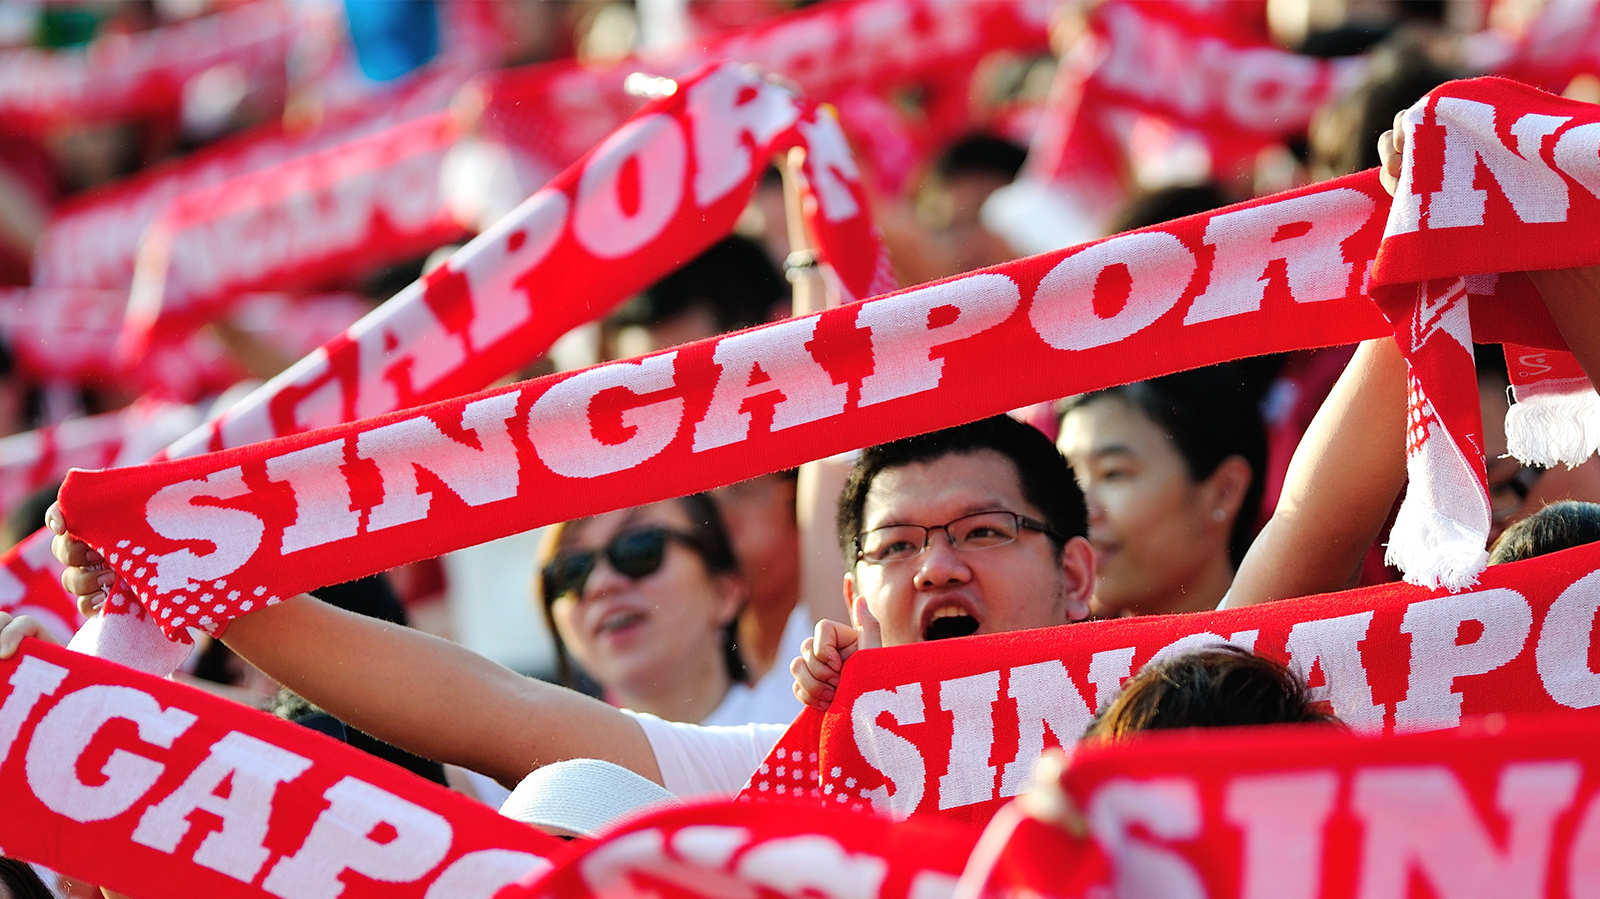 5 times Singapore showed character